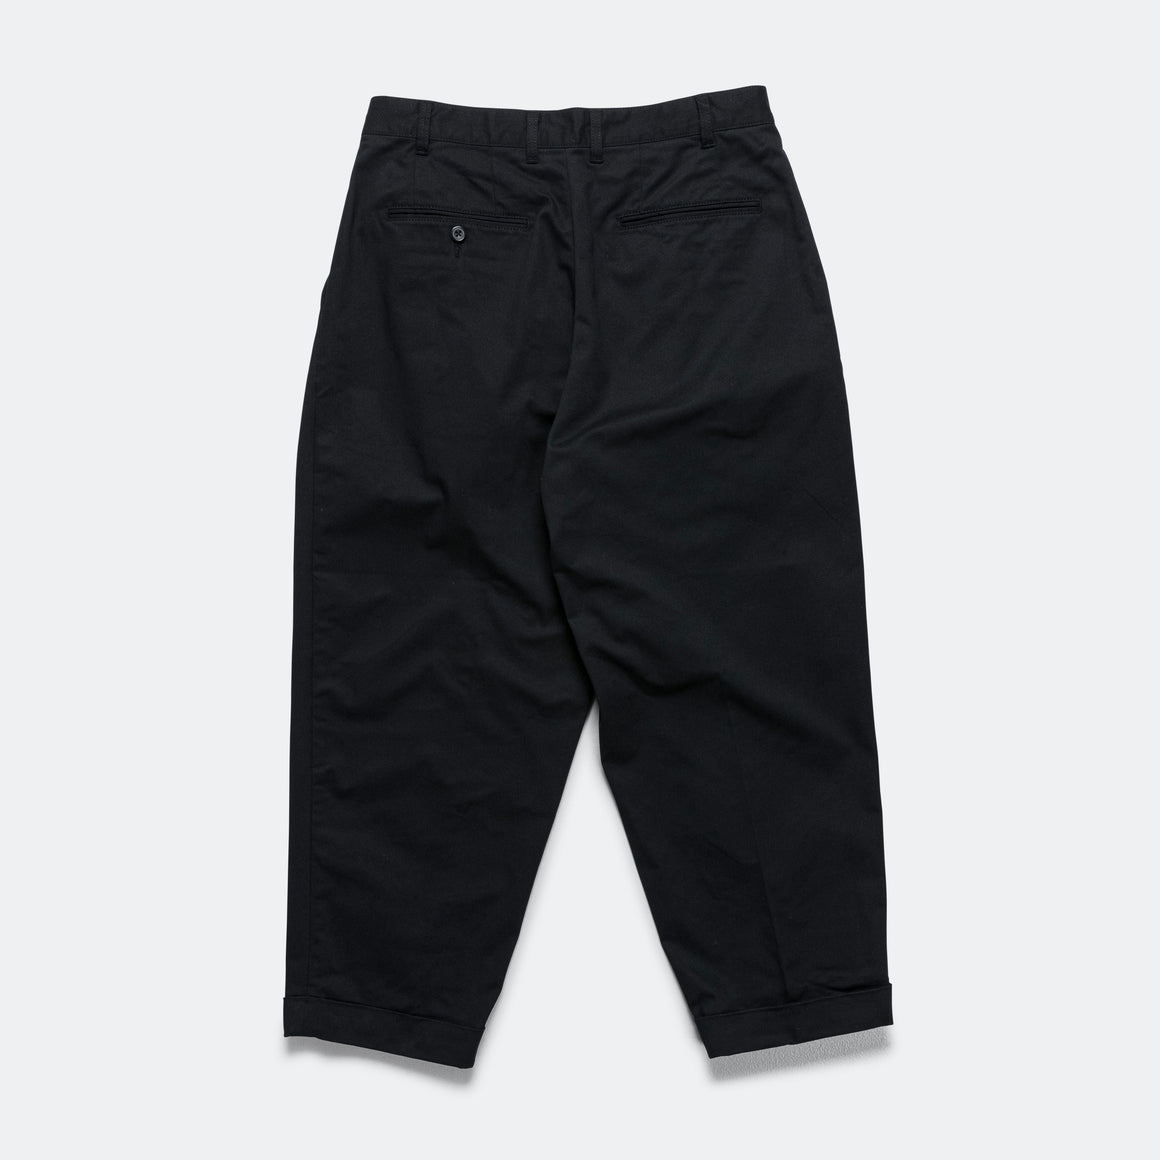 Beams Plus - 2 Pleat Twill Pants - Black - UP THERE